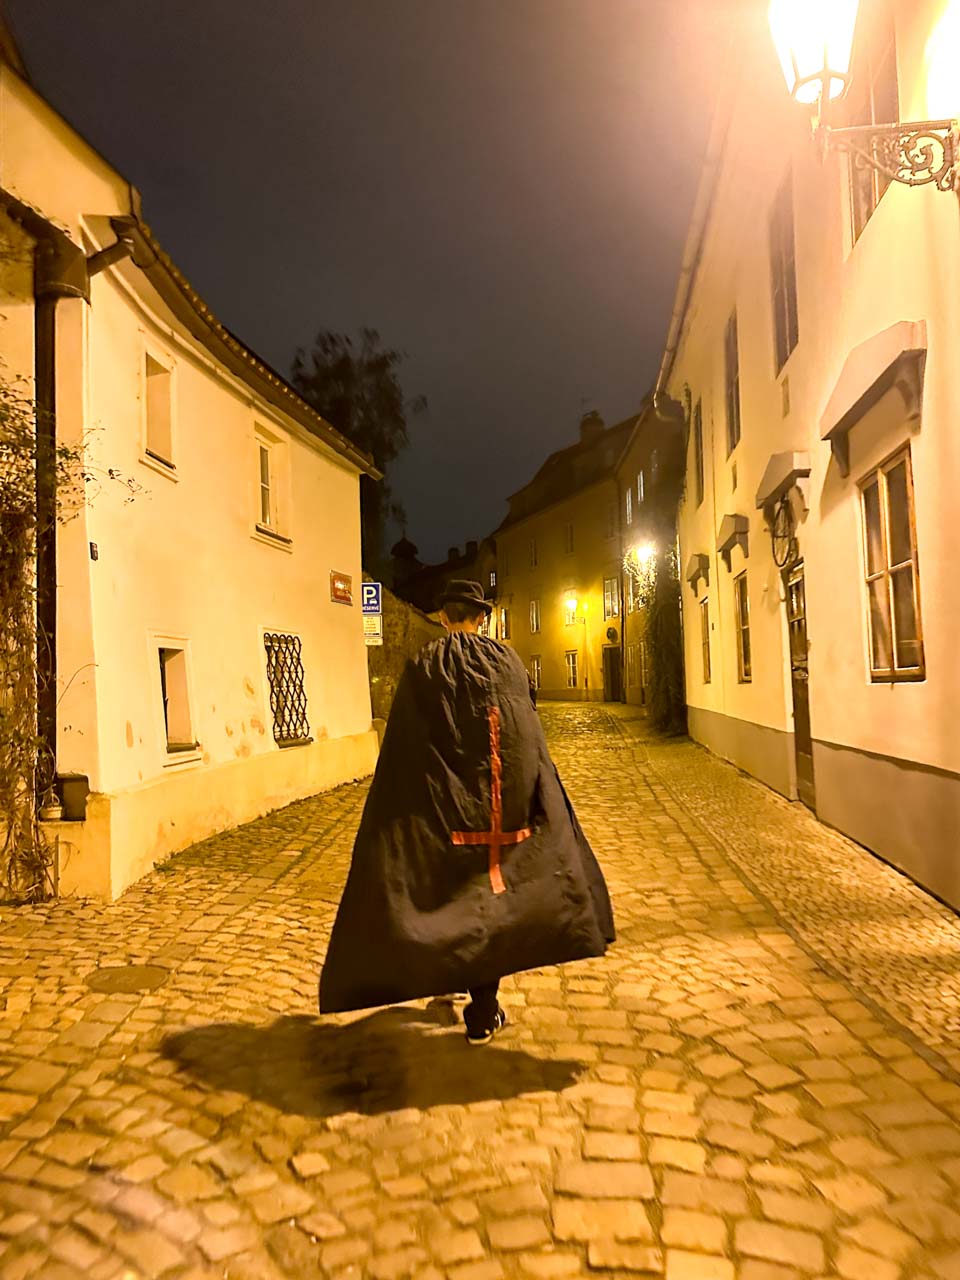 Man in a black cloak with a red cross on it walking down a street in Prague at night